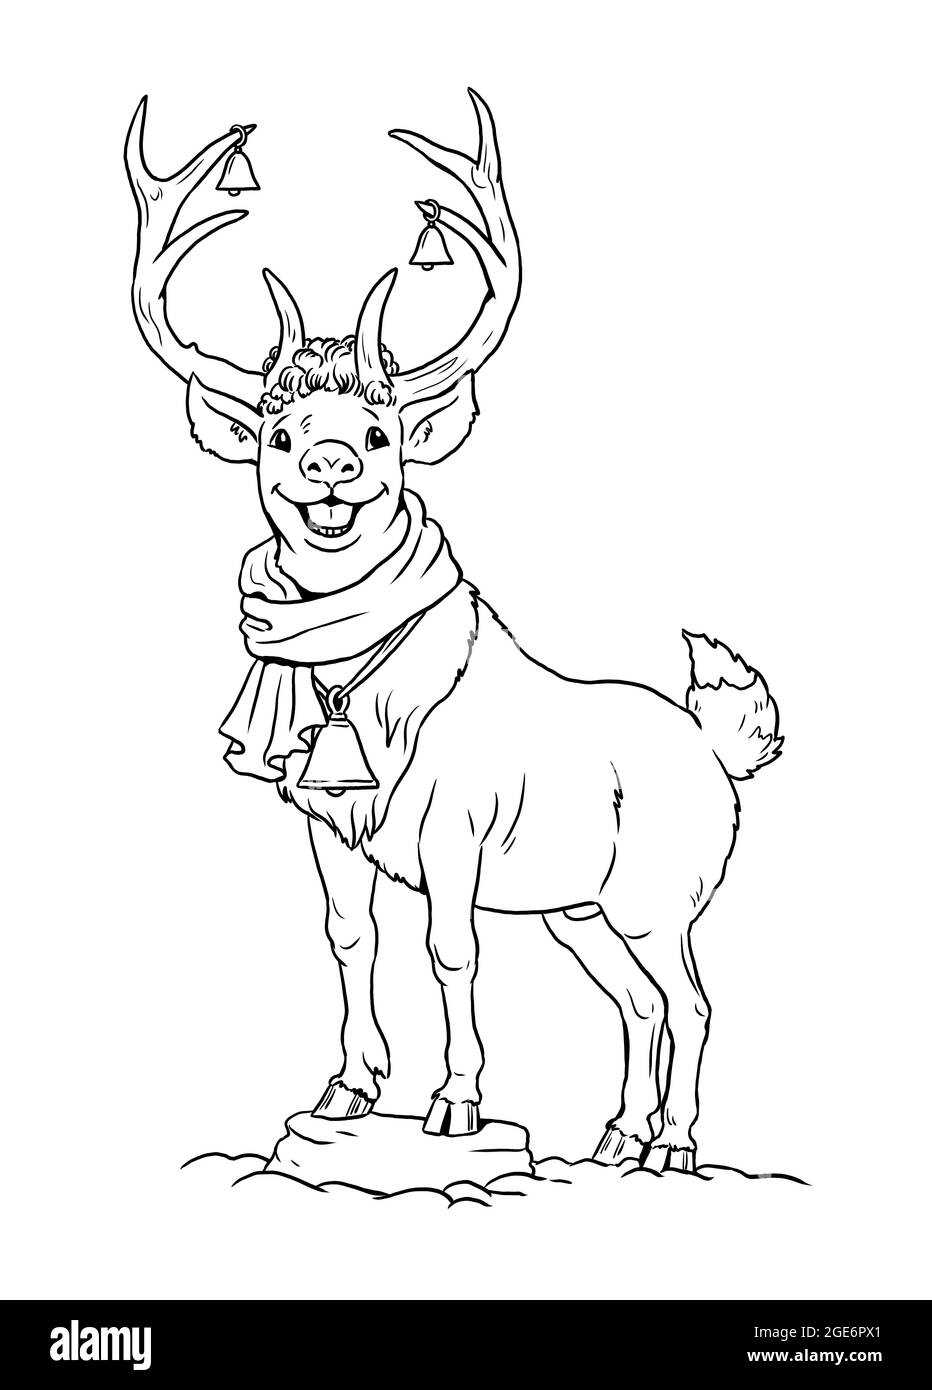 Rudolph the Red-Nosed Reindeer. Christmas template for coloring. Stock Photo